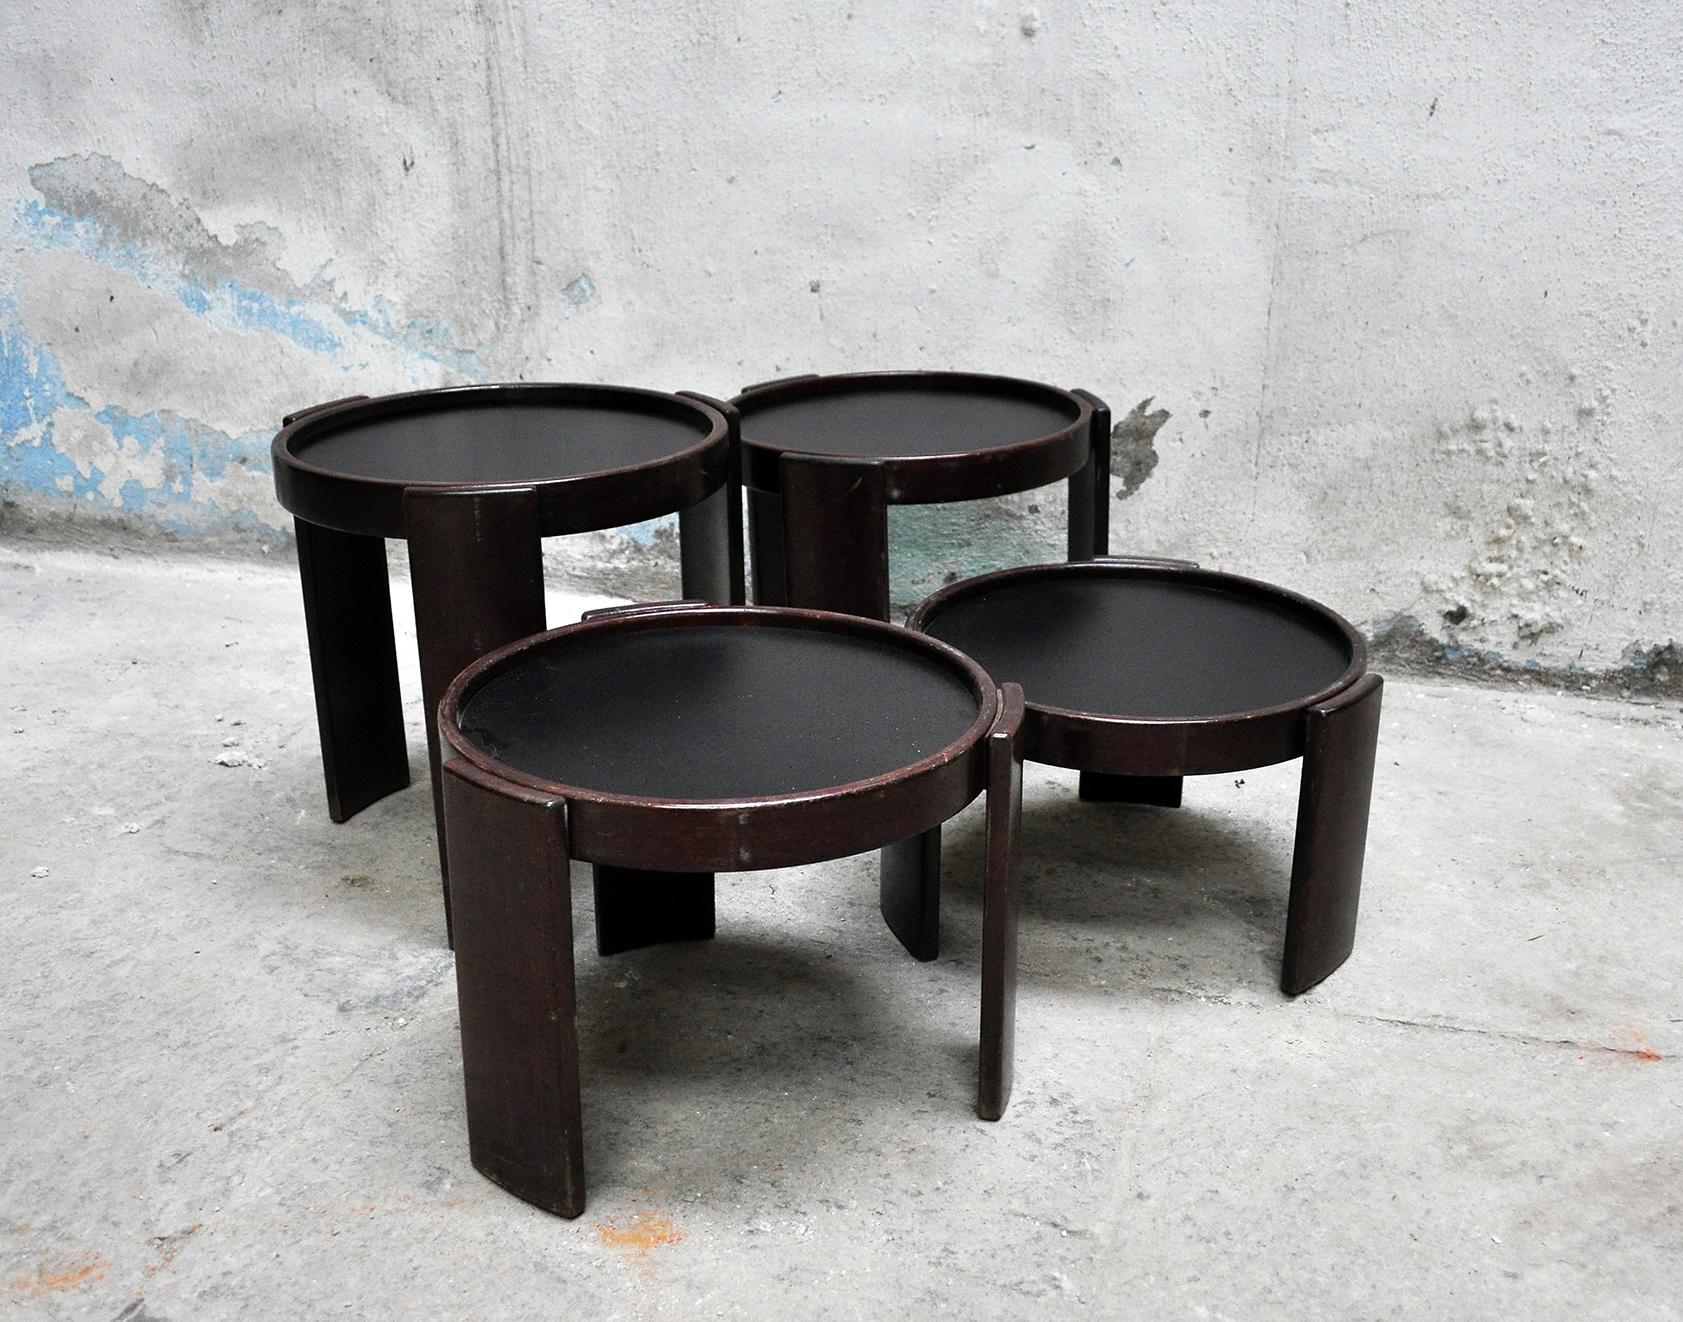 Mid-20th Century Italian Vintage Interlocking Tables by Gianfranco Frattini for Cassina, 1960s For Sale